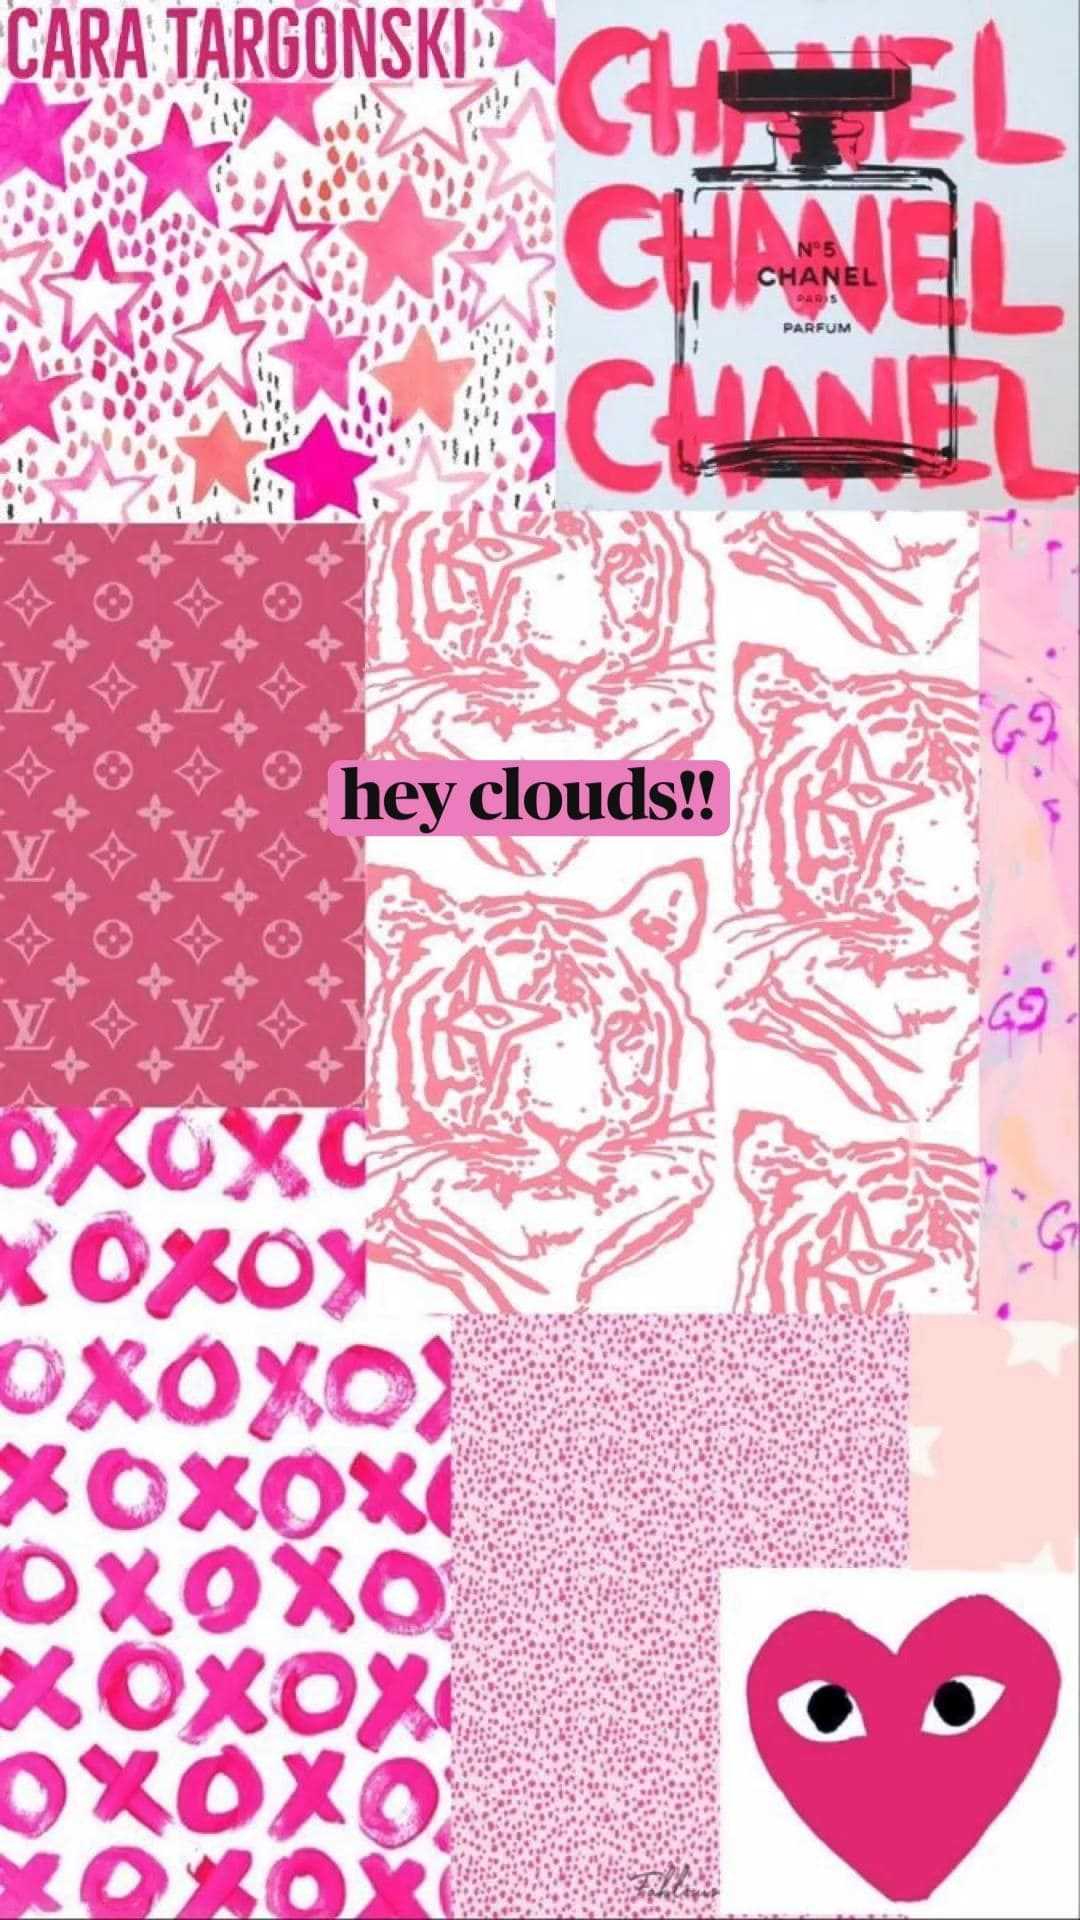 A collage of pink and white designs with hearts - Preppy, Cancer, Chanel